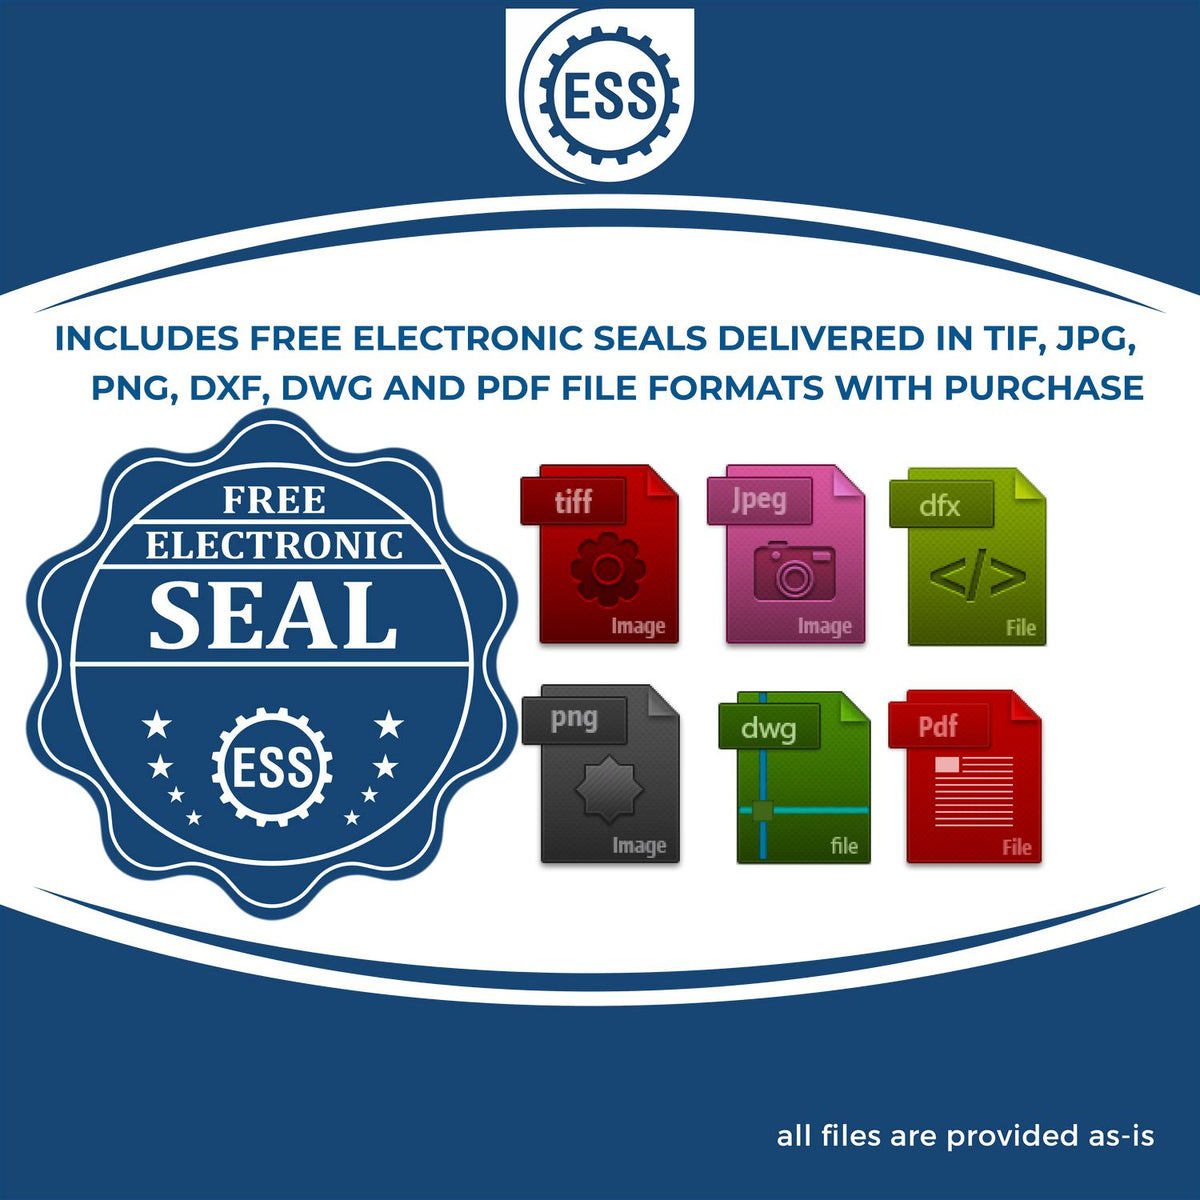 An infographic for the free electronic seal for the Gift Maine Geologist Seal illustrating the different file type icons such as DXF, DWG, TIF, JPG and PNG.